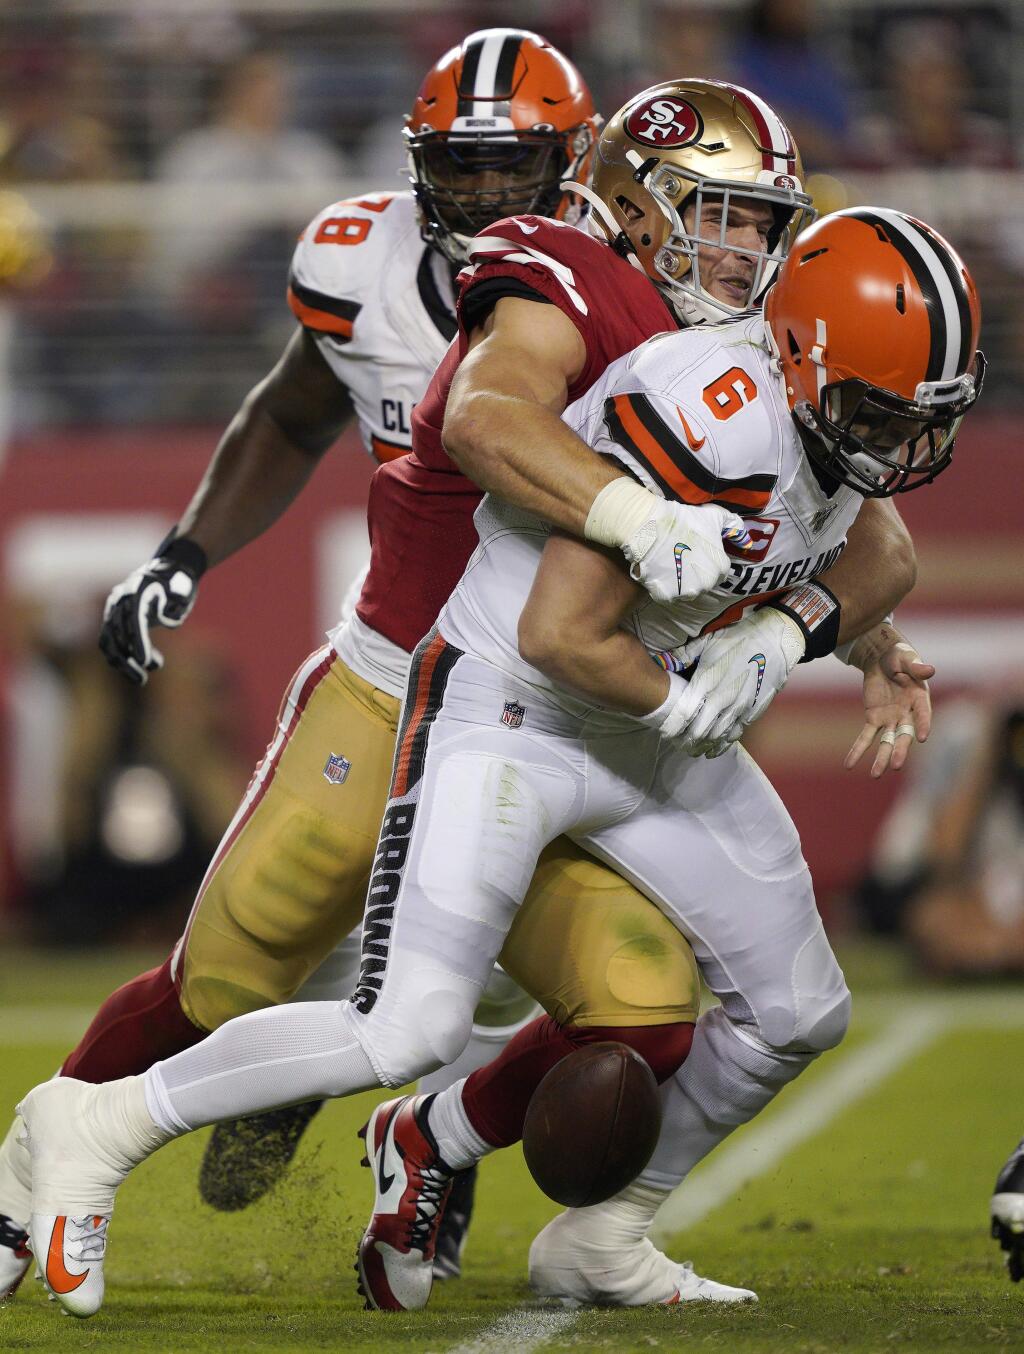 San Francisco 49ers defensive end Nick Bosa, center, sacks and forces a fumble by Cleveland Browns quarterback Baker Mayfield (6) during the second half of an NFL football game in Santa Clara, Calif., Monday, Oct. 7, 2019. The Browns recovered the ball. (AP Photo/Tony Avelar)